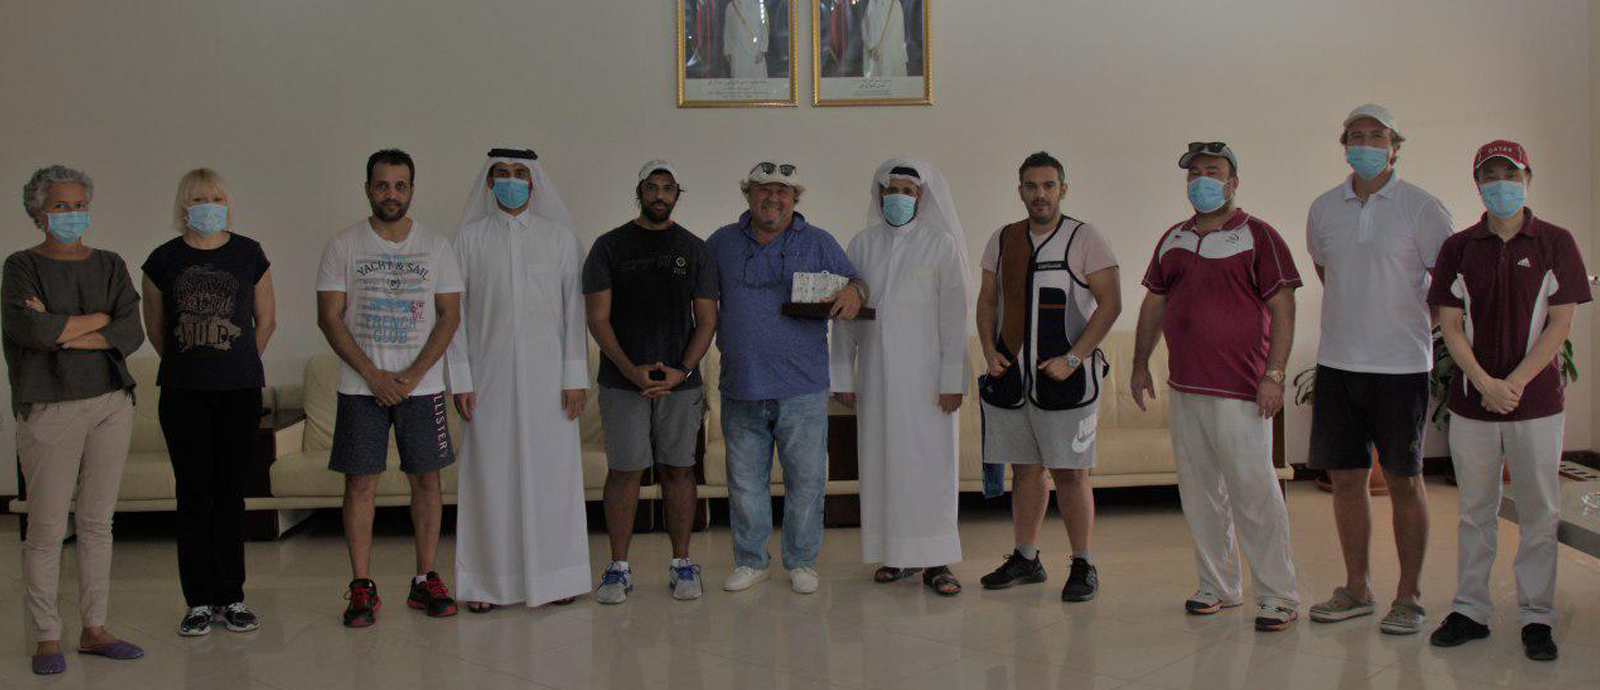 On the sidelines of the ceremony at the Losail Shooting Range clubhouse